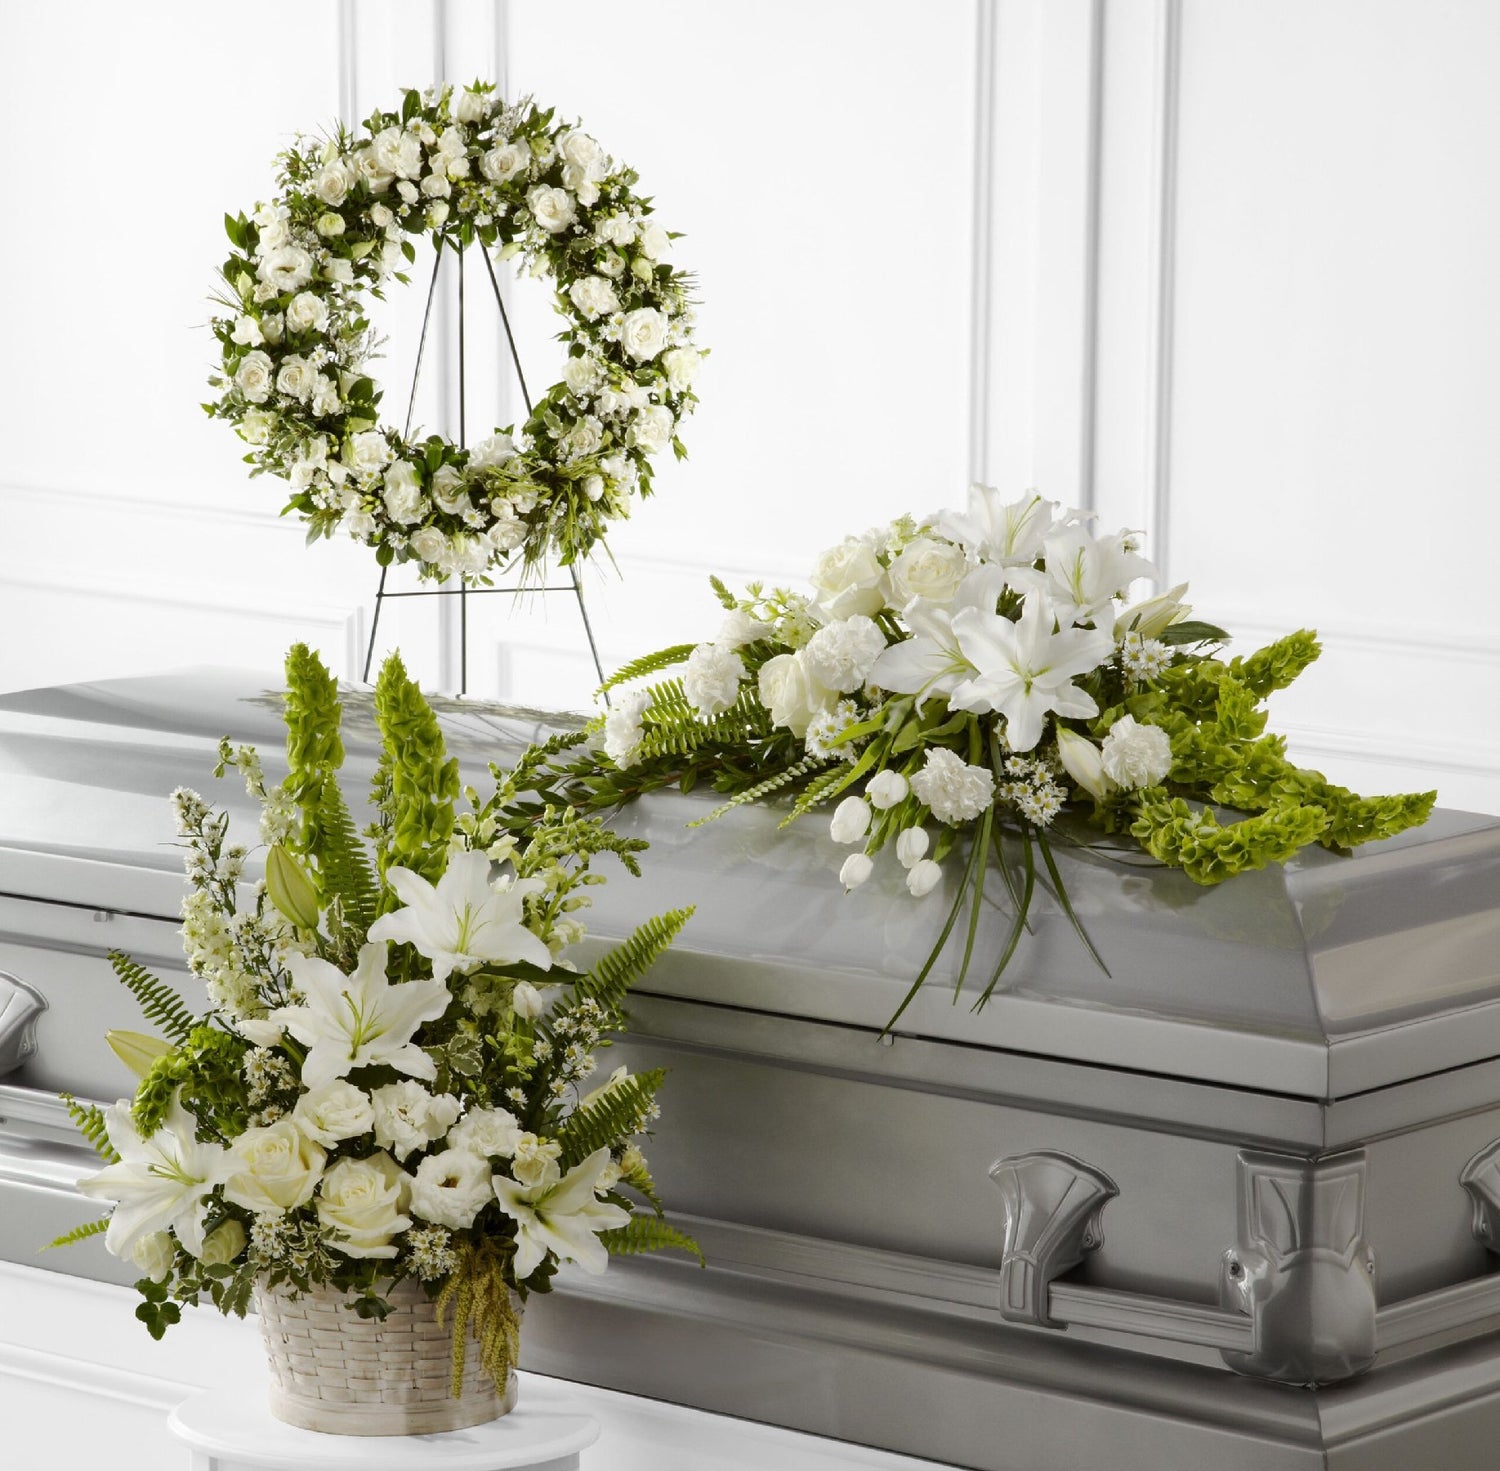 Funeral Casket Covers - Flower Delivery Brooklyn